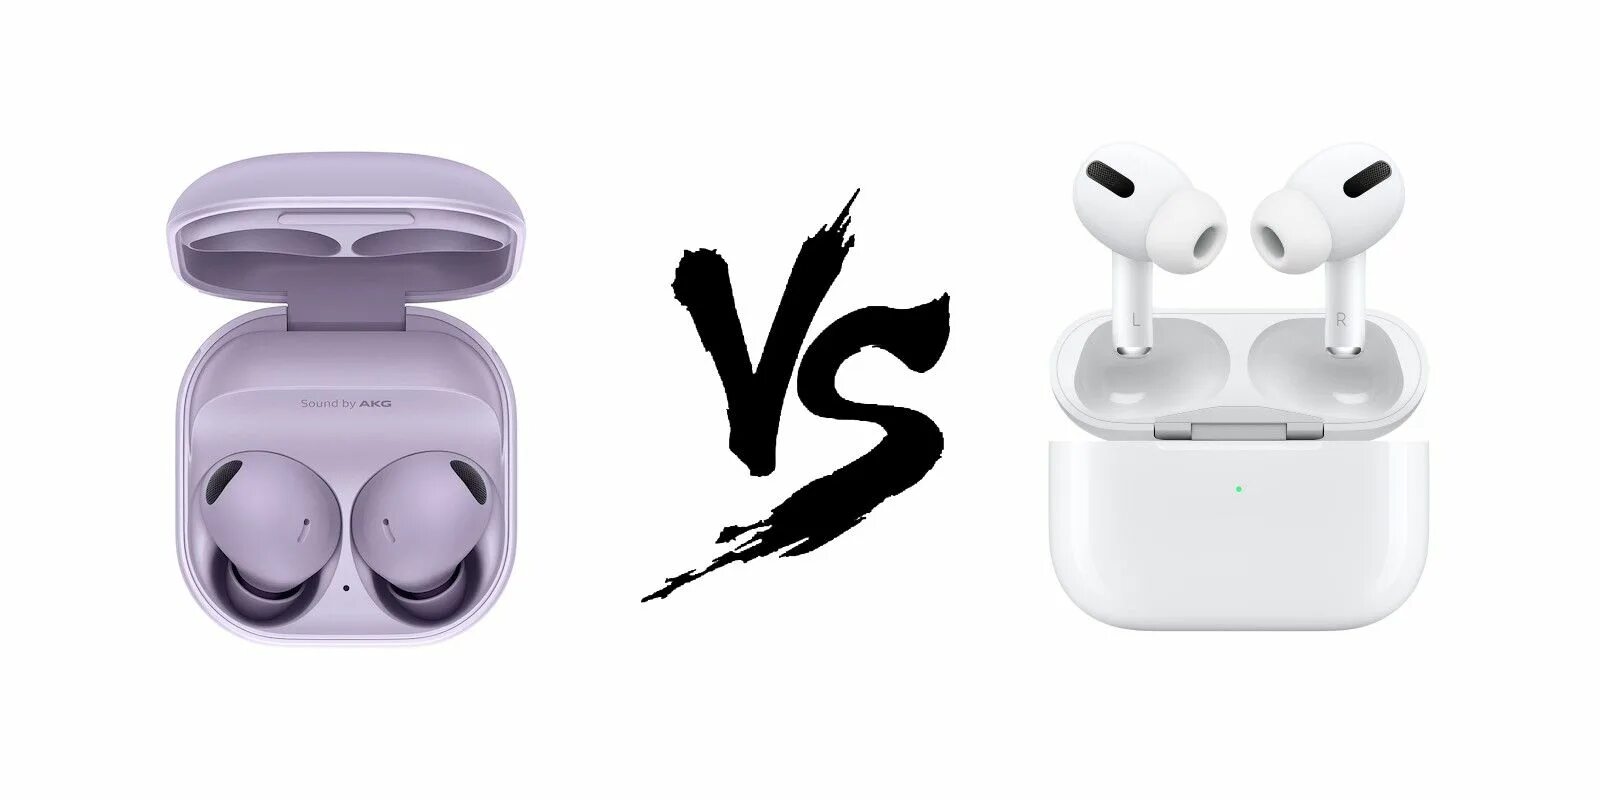 Airpods vs buds. Samsung Buds 2 Pro vs AIRPODS Pro 2. Samsung AIRPODS 2. Apple AIRPODS Pro vs pro2. AIRPODS Pro 2.